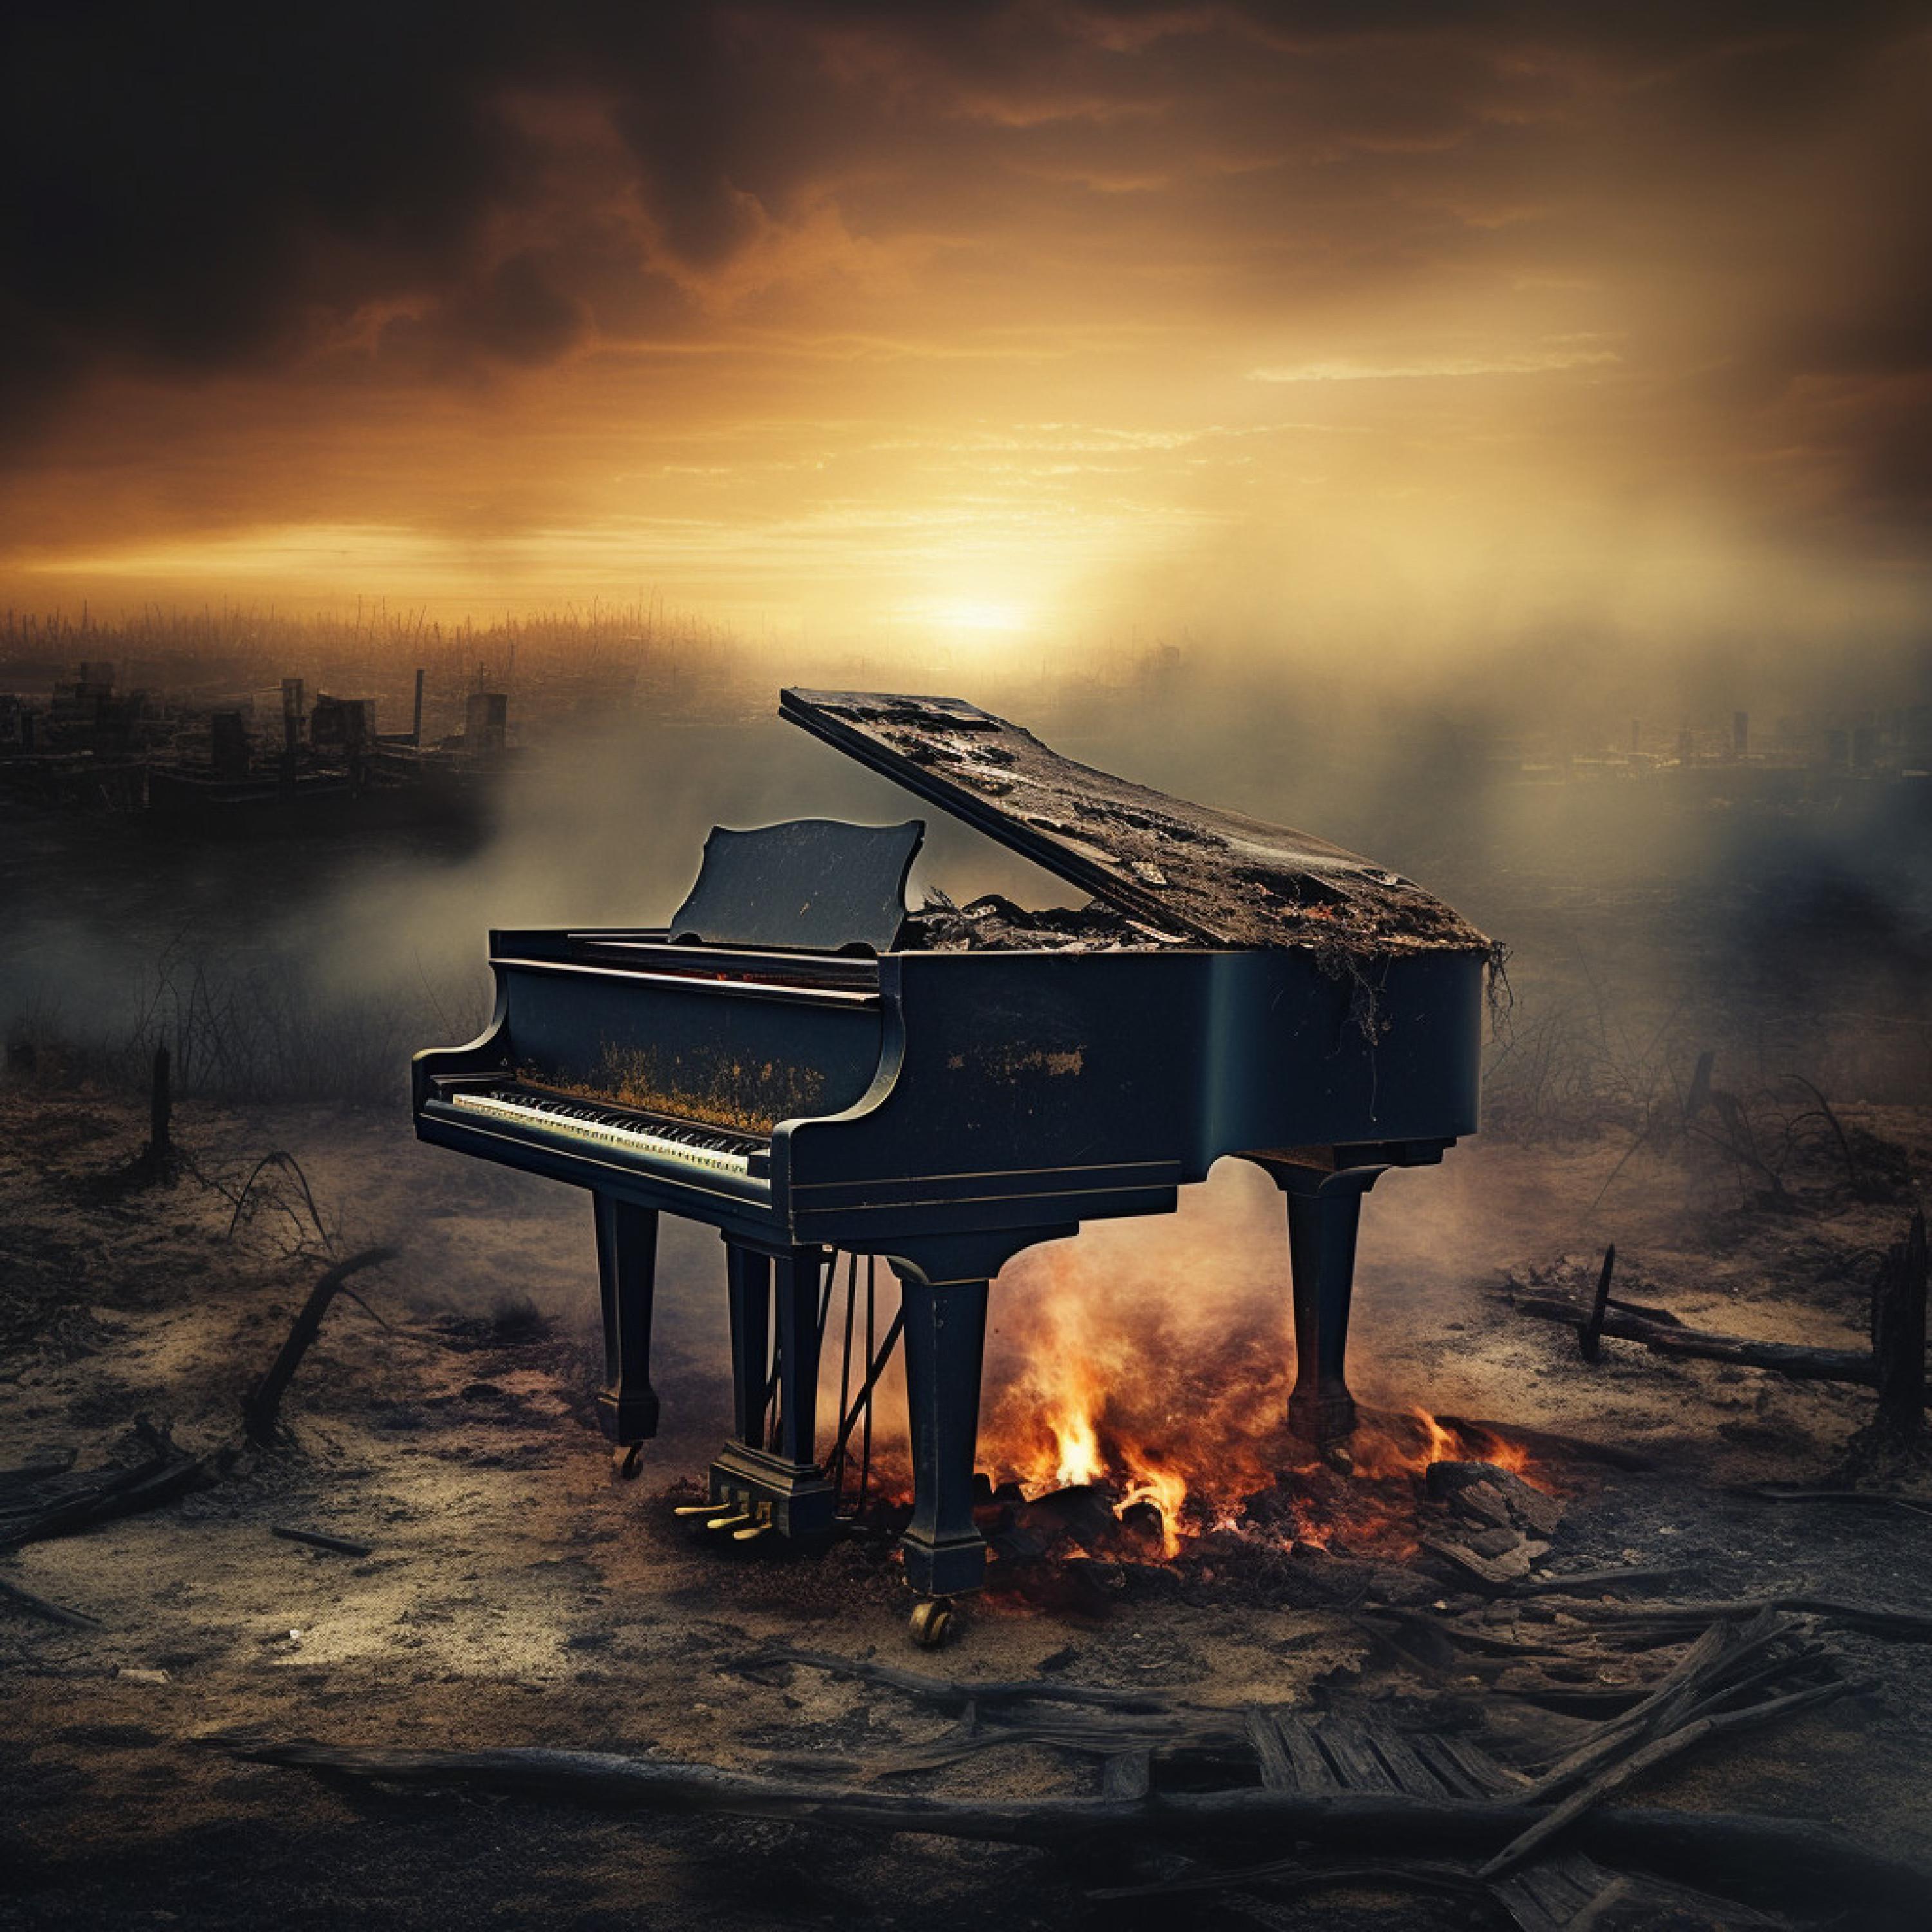 Classical Piano Music Masters - Rhythmic Piano Sunset Notes